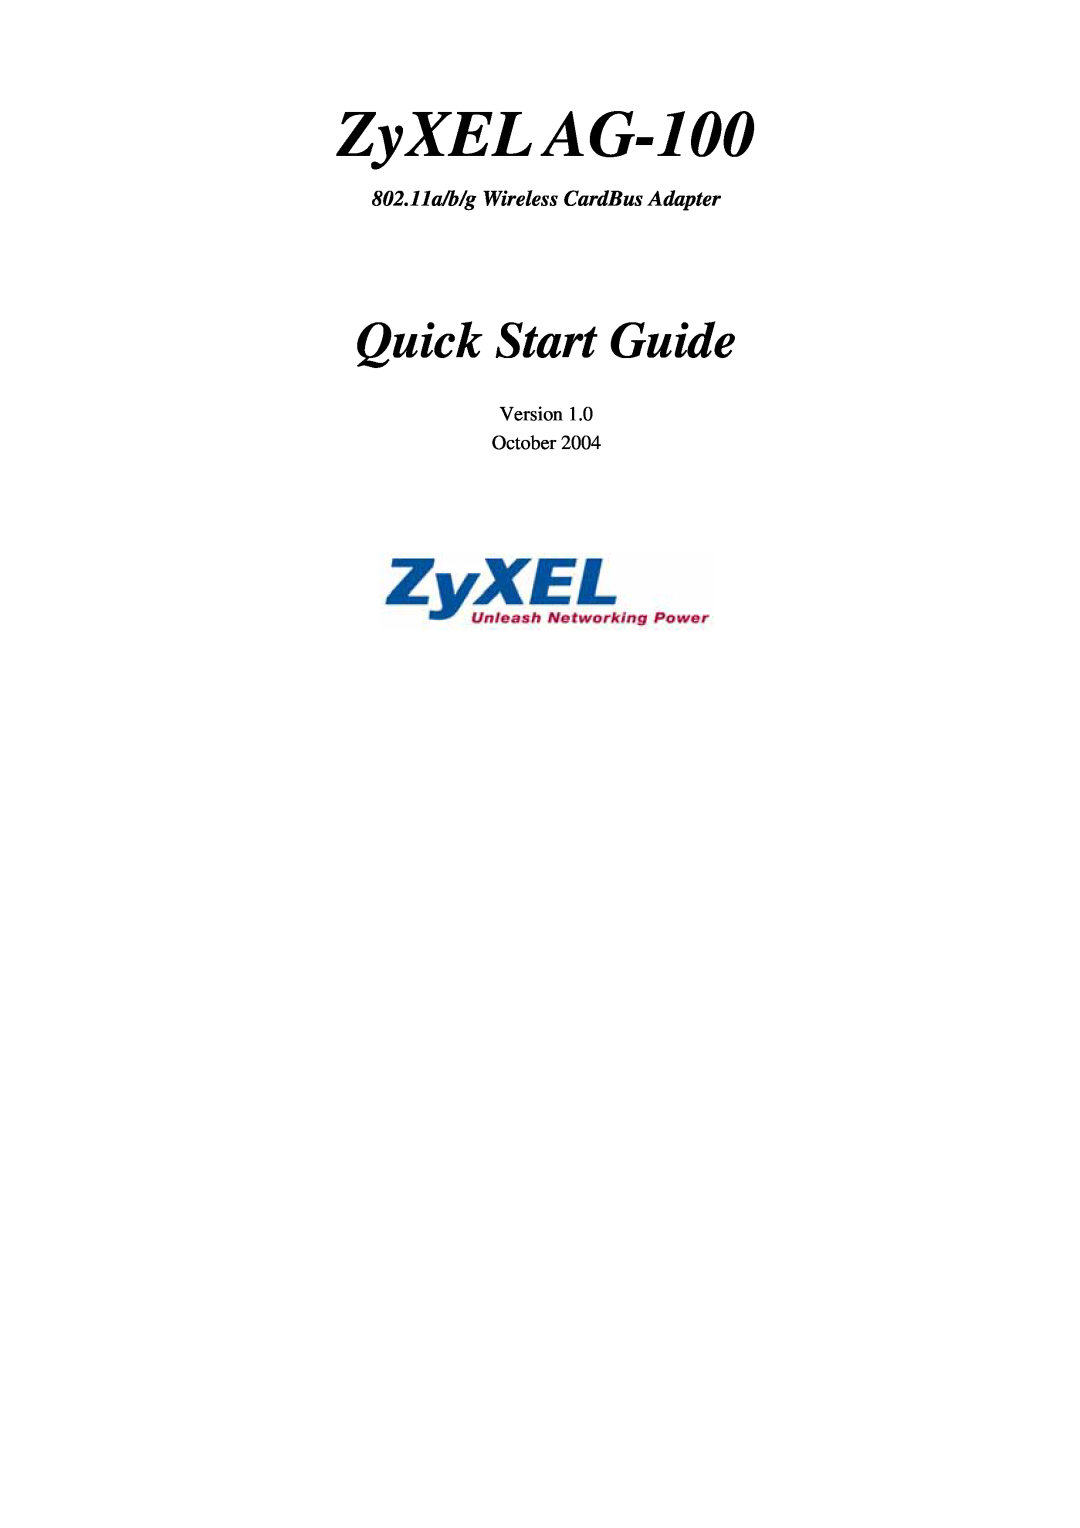 ZyXEL Communications quick start ZyXEL AG-100, Quick Start Guide, 802.11a/b/g Wireless CardBus Adapter, Version October 